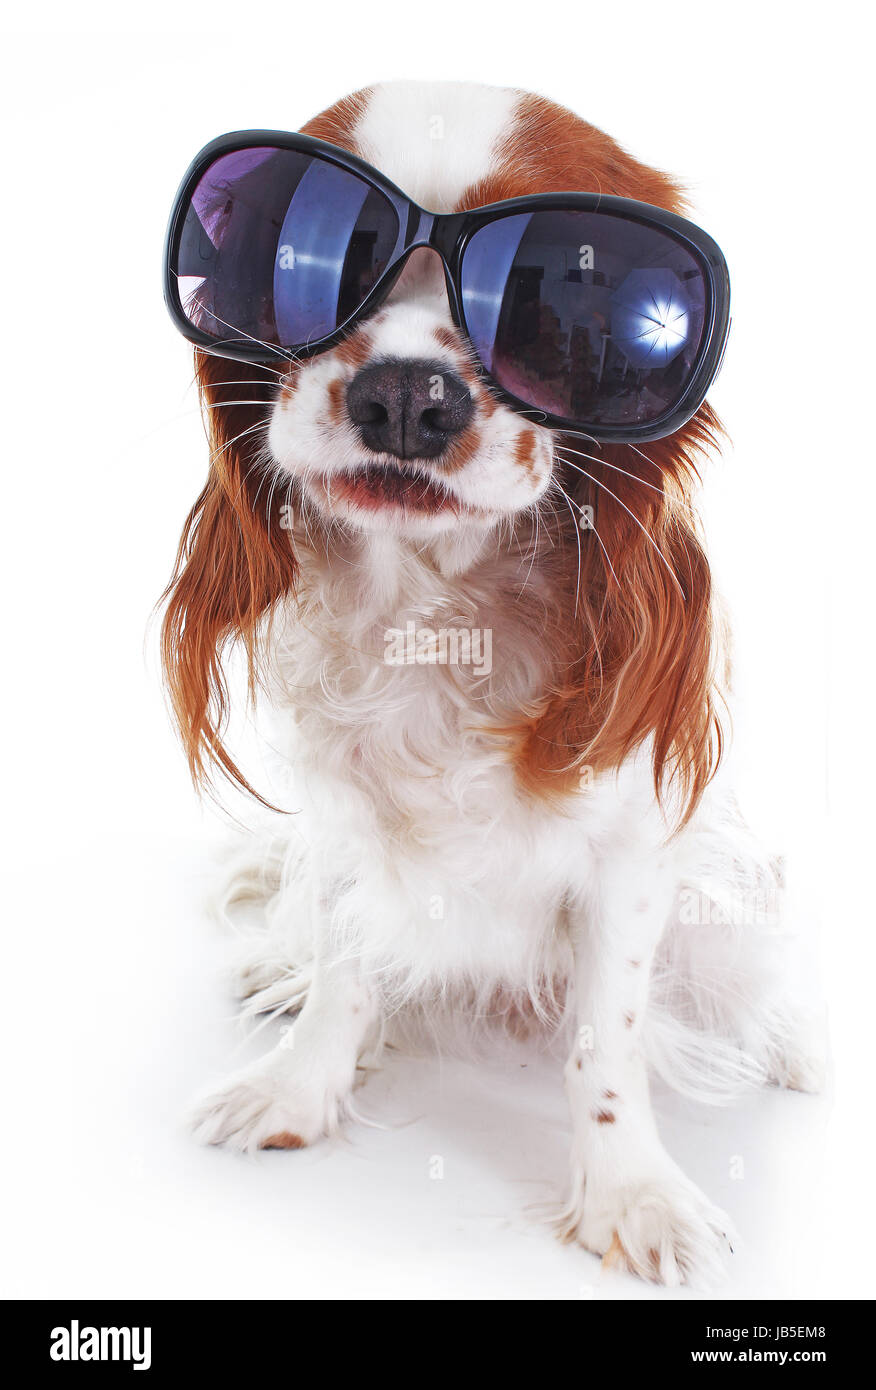 Funny dog with sunglasses can illustrate travelling or any other ...